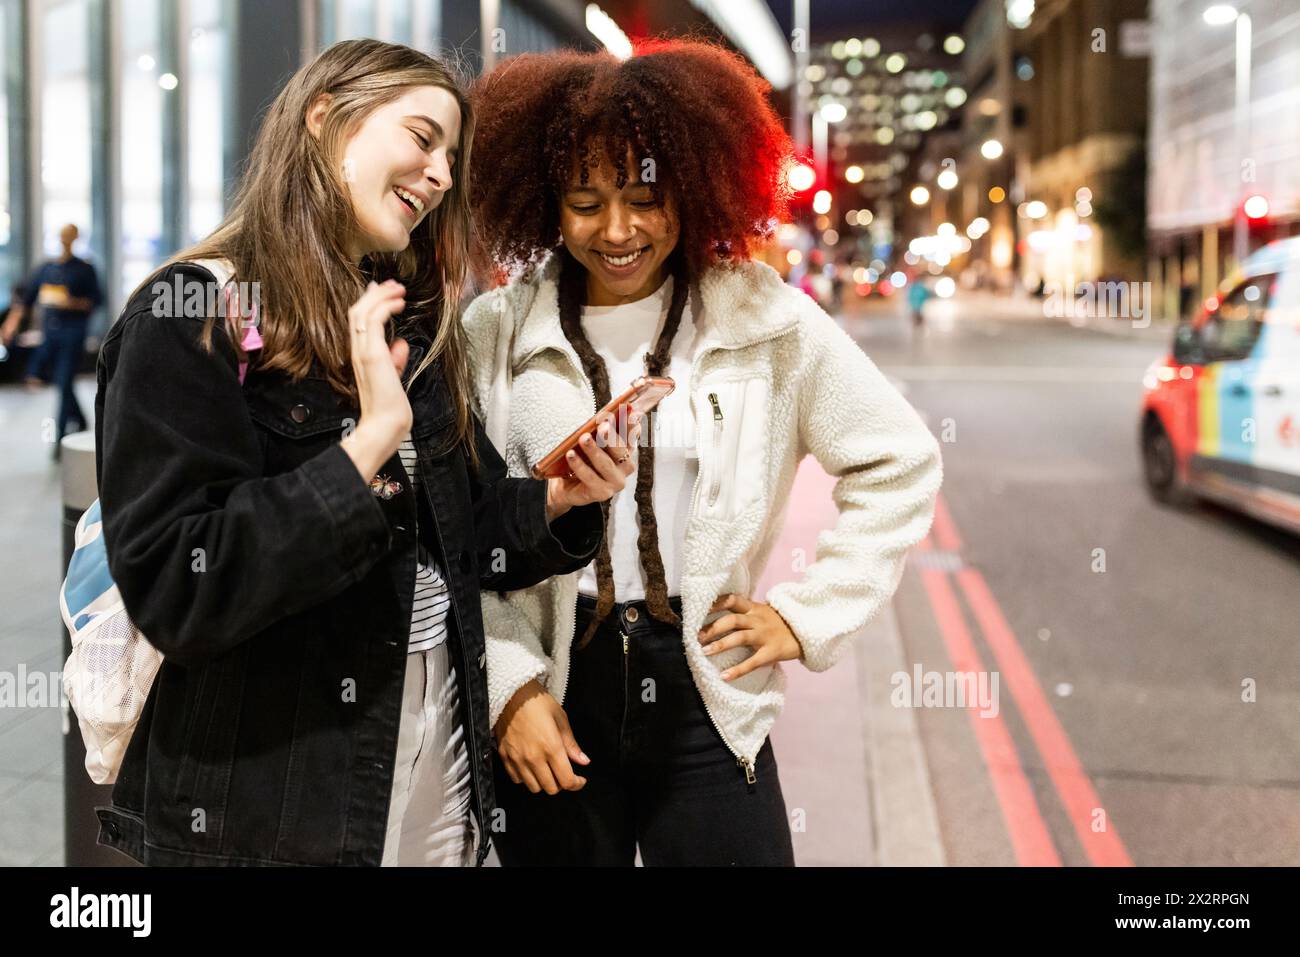 Happy young friends using smart phone on street at night Stock Photo